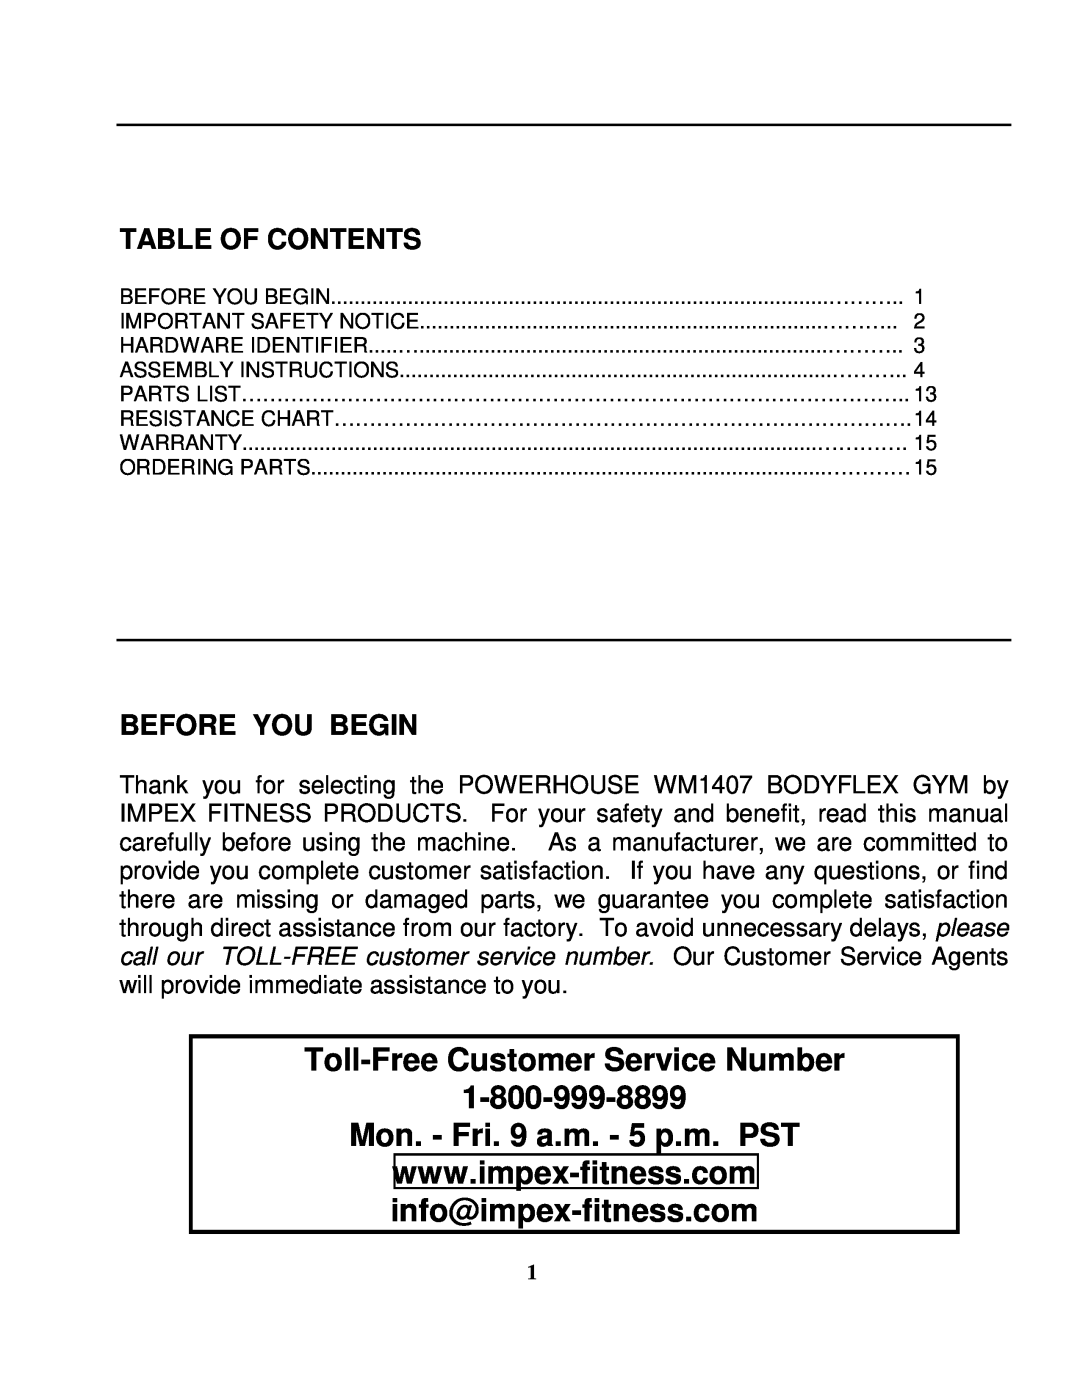 Impex WM 1407 Table Of Contents, Before You Begin, Toll-Free Customer Service Number, Mon. - Fri. 9 a.m. - 5 p.m. PST 